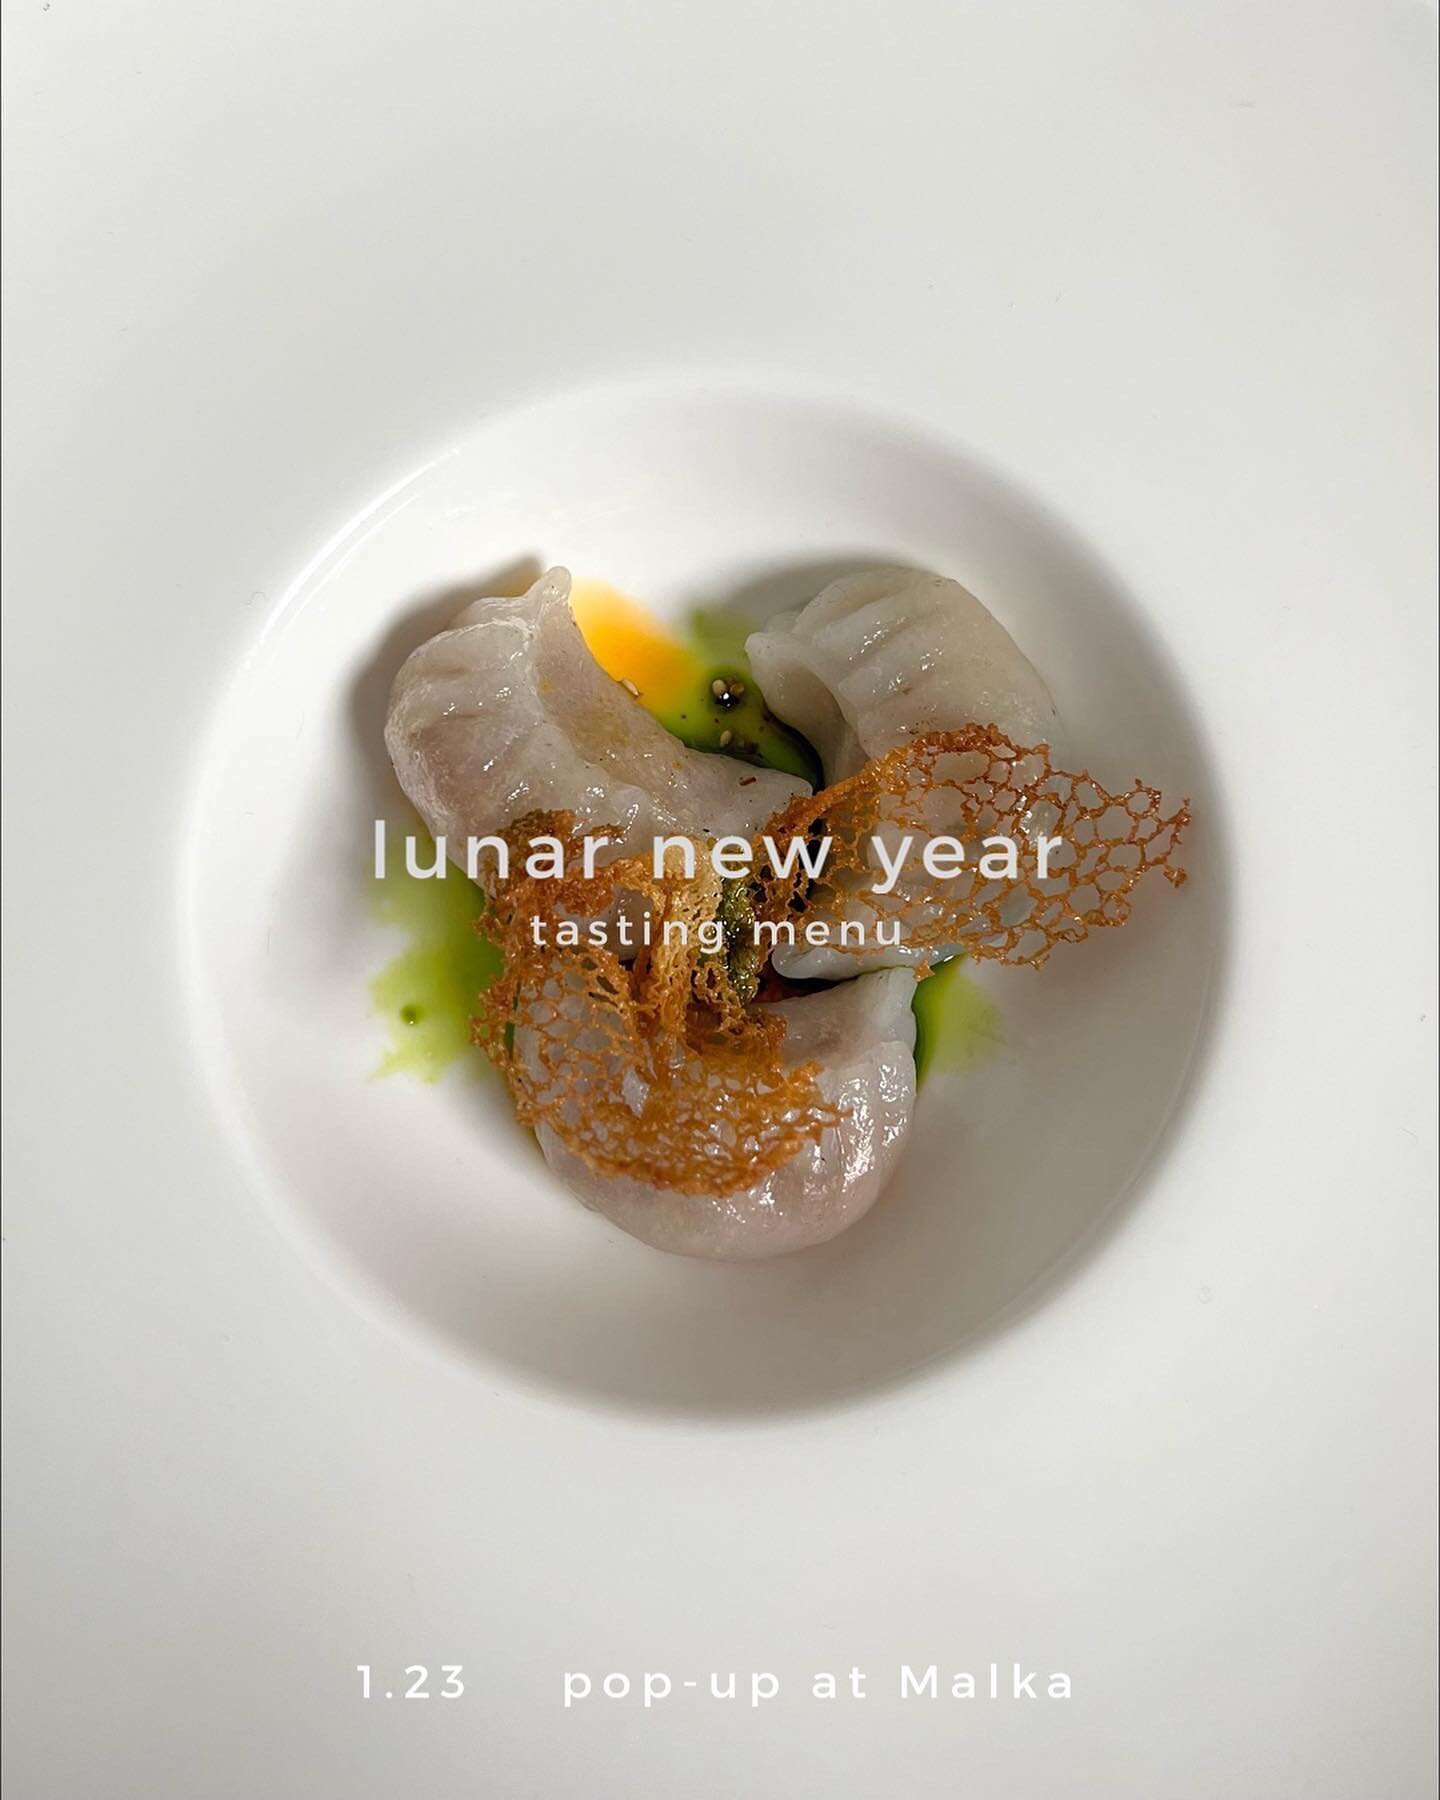 UPDATE: we are sold out! Please email if you would like to be added to the waitlist.
___

Reservations are now open for the January @surongpdx pop-up! For Lunar New Year, I've created a special tasting menu centered on five winter vegetables availabl